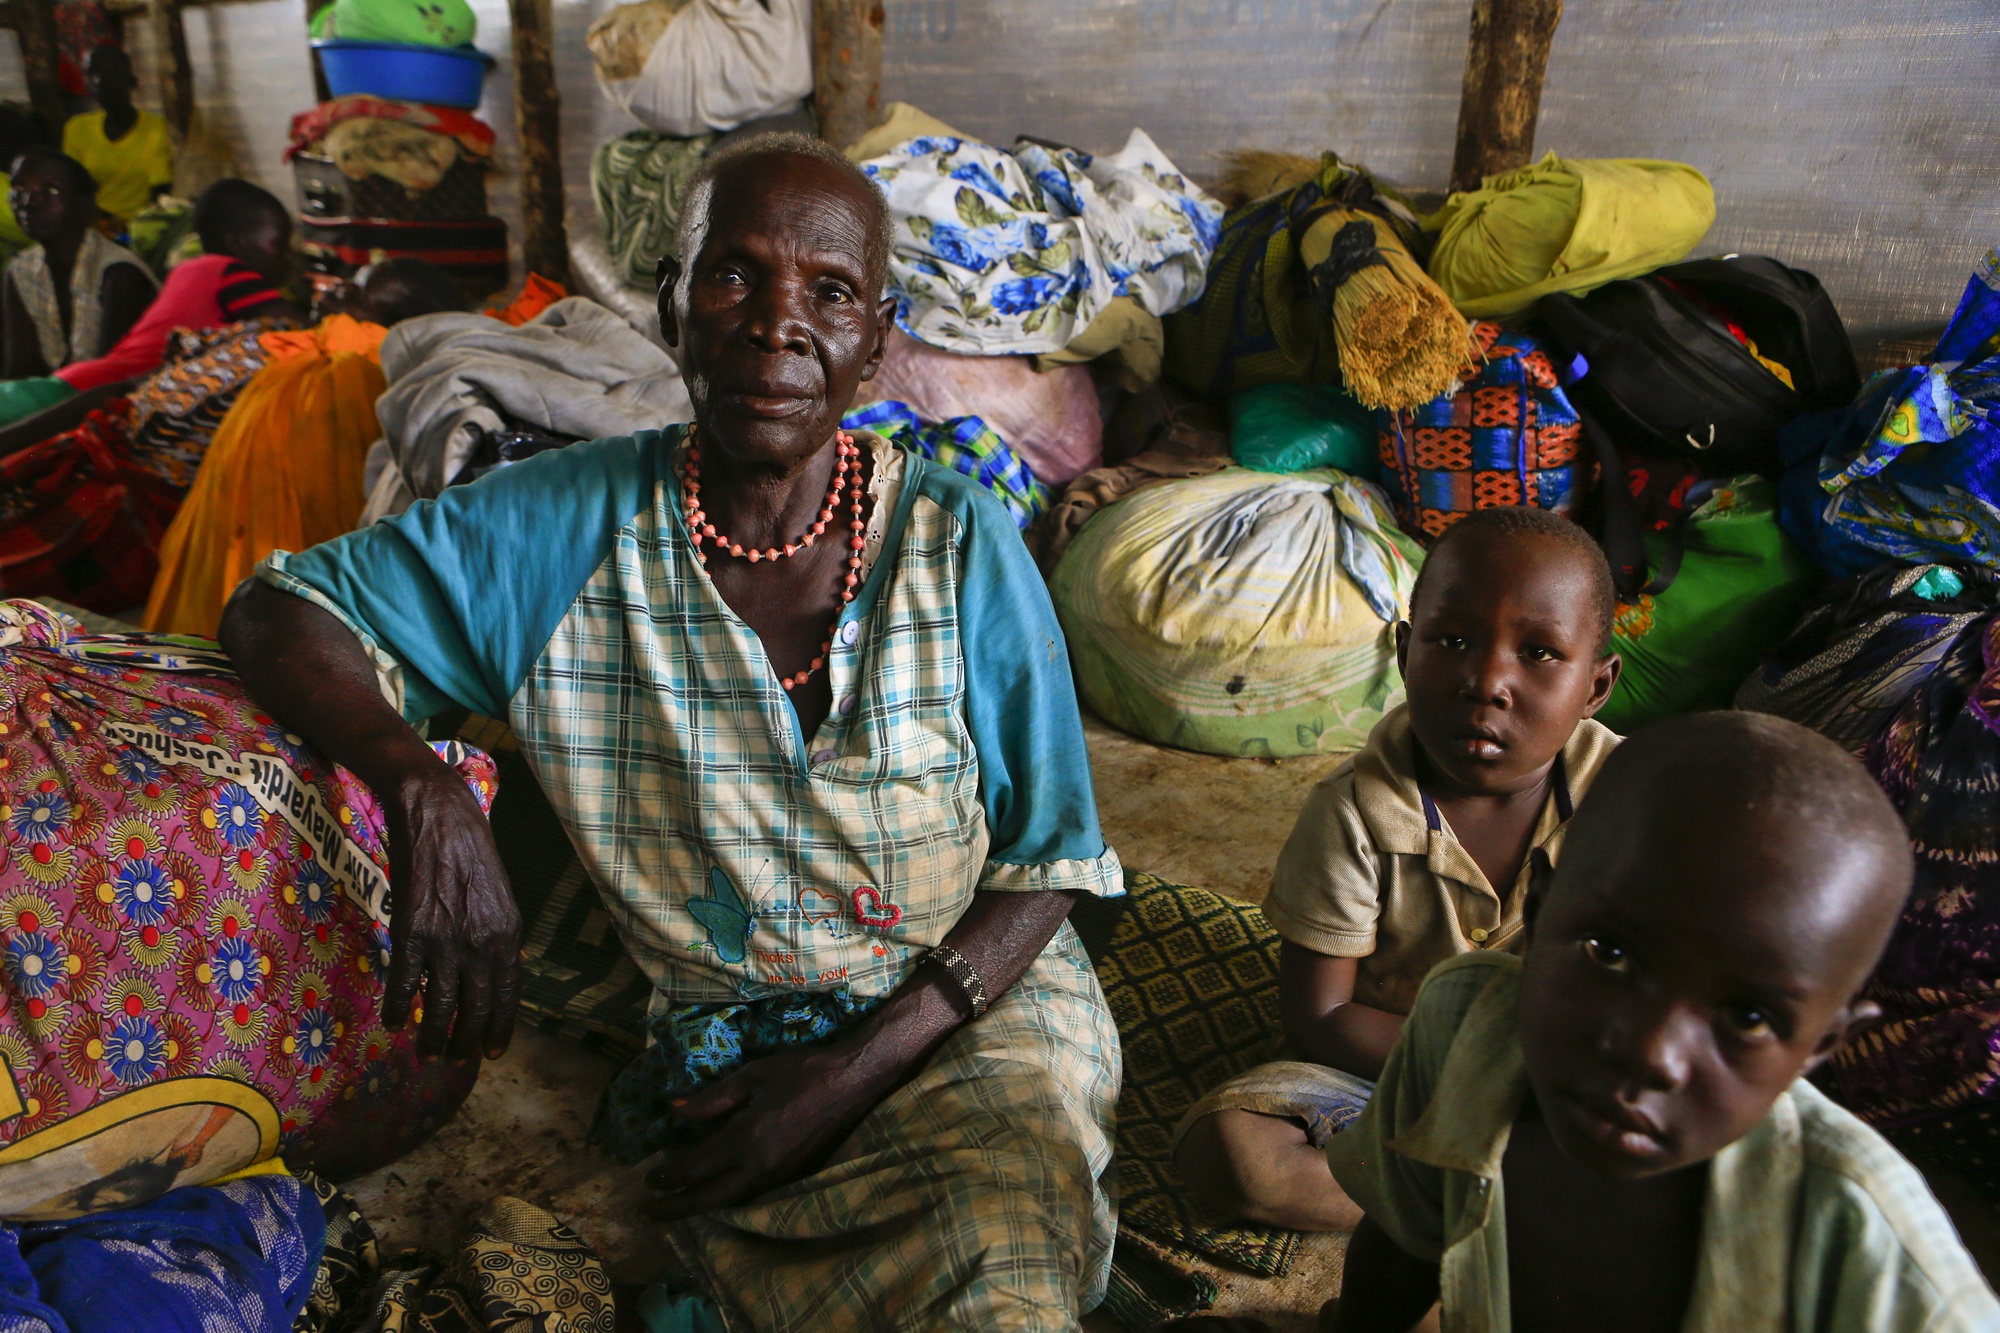 Abeer sits wearing a blue and white plaid dress alongside her two grandchildren in a tent filled with belongings of families who fled their homes in Pajok, South Sudan